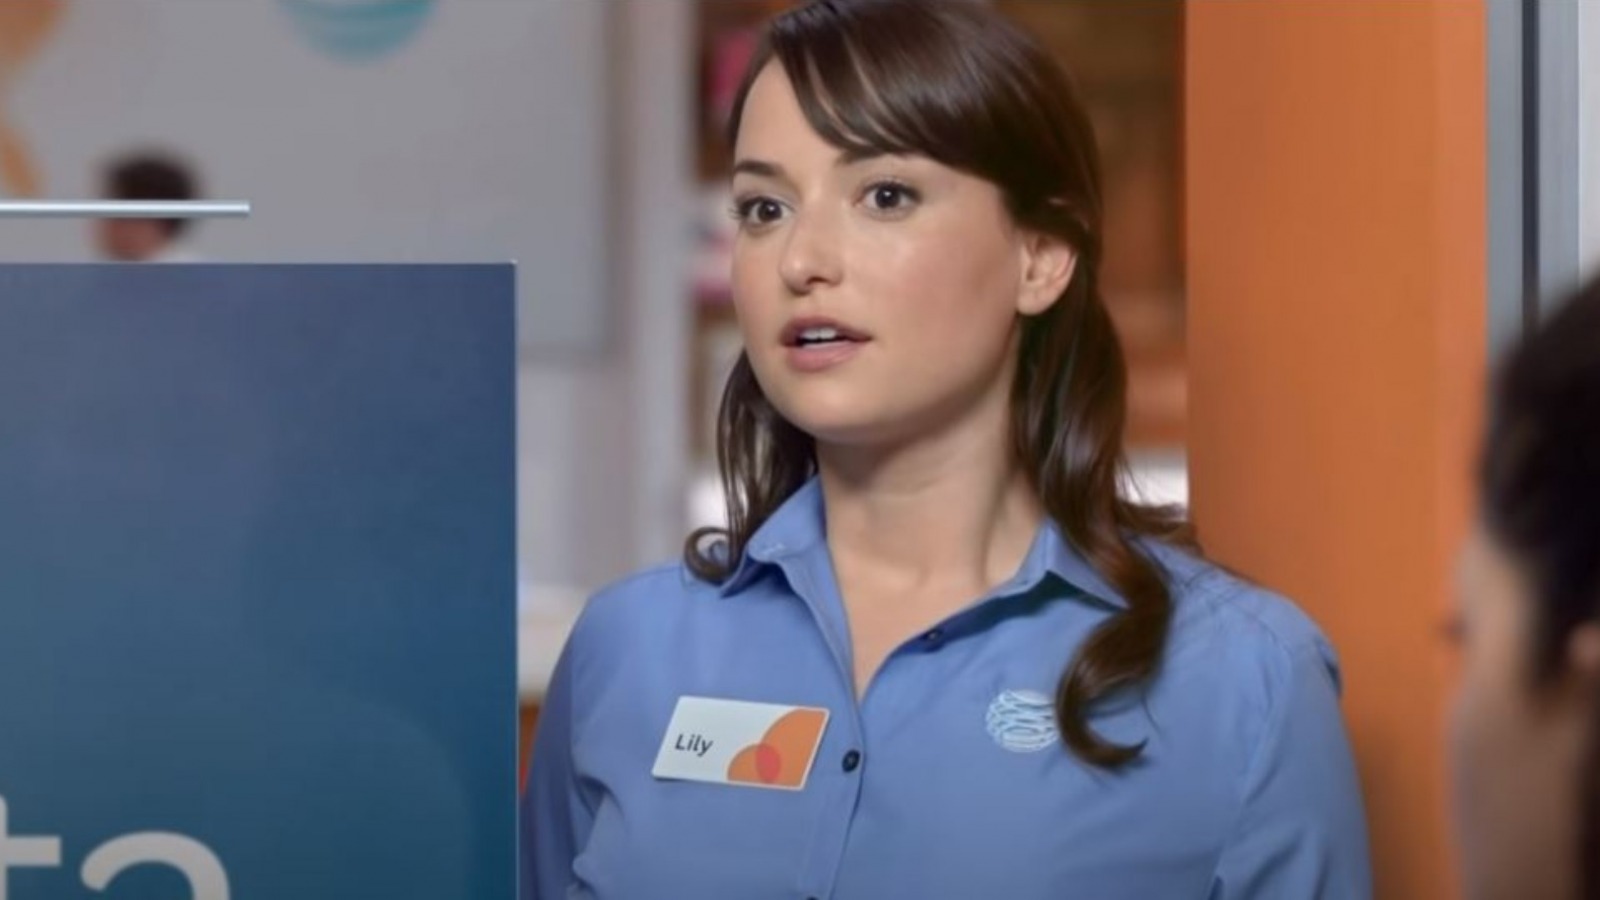 hot photos of the at&t girl